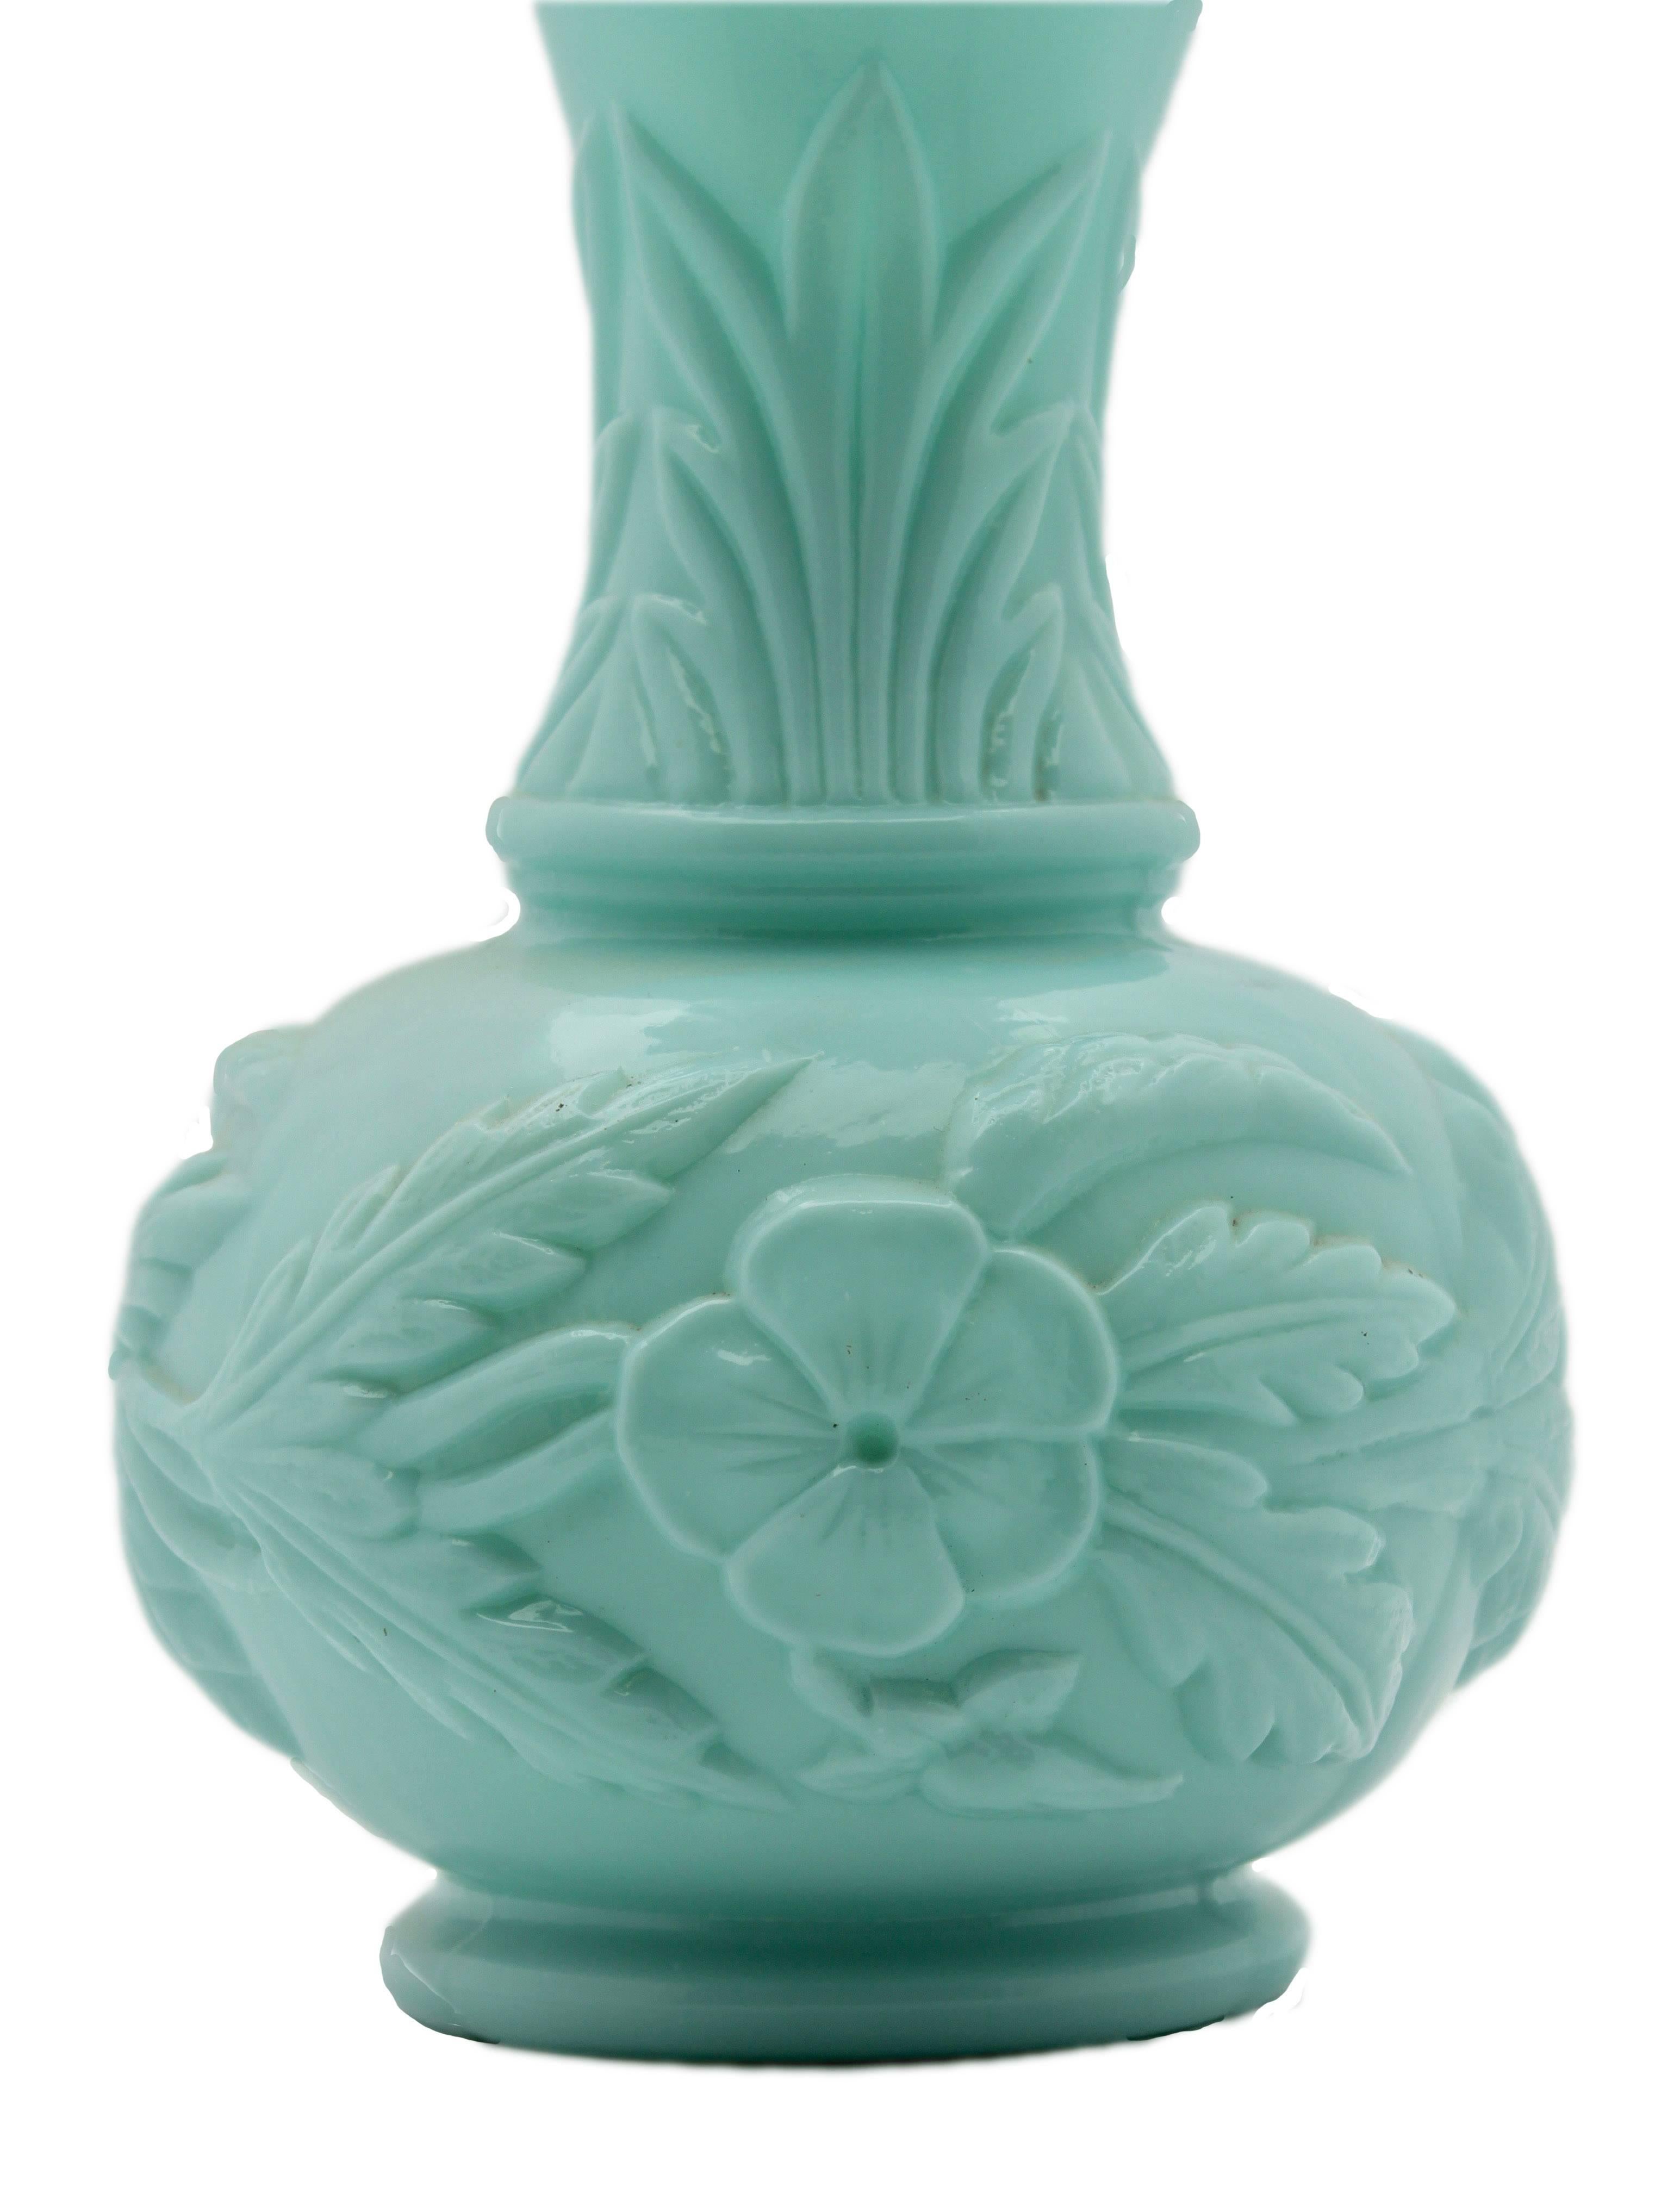 French opaline vase in mint color.
This beautiful large antique opaline glass vase in mint color is believed by French glass manufacturer Portieux Vallerysthal. The richly decorated vase comes from circa 1900. The Art Nouveau or Jugendstil milk